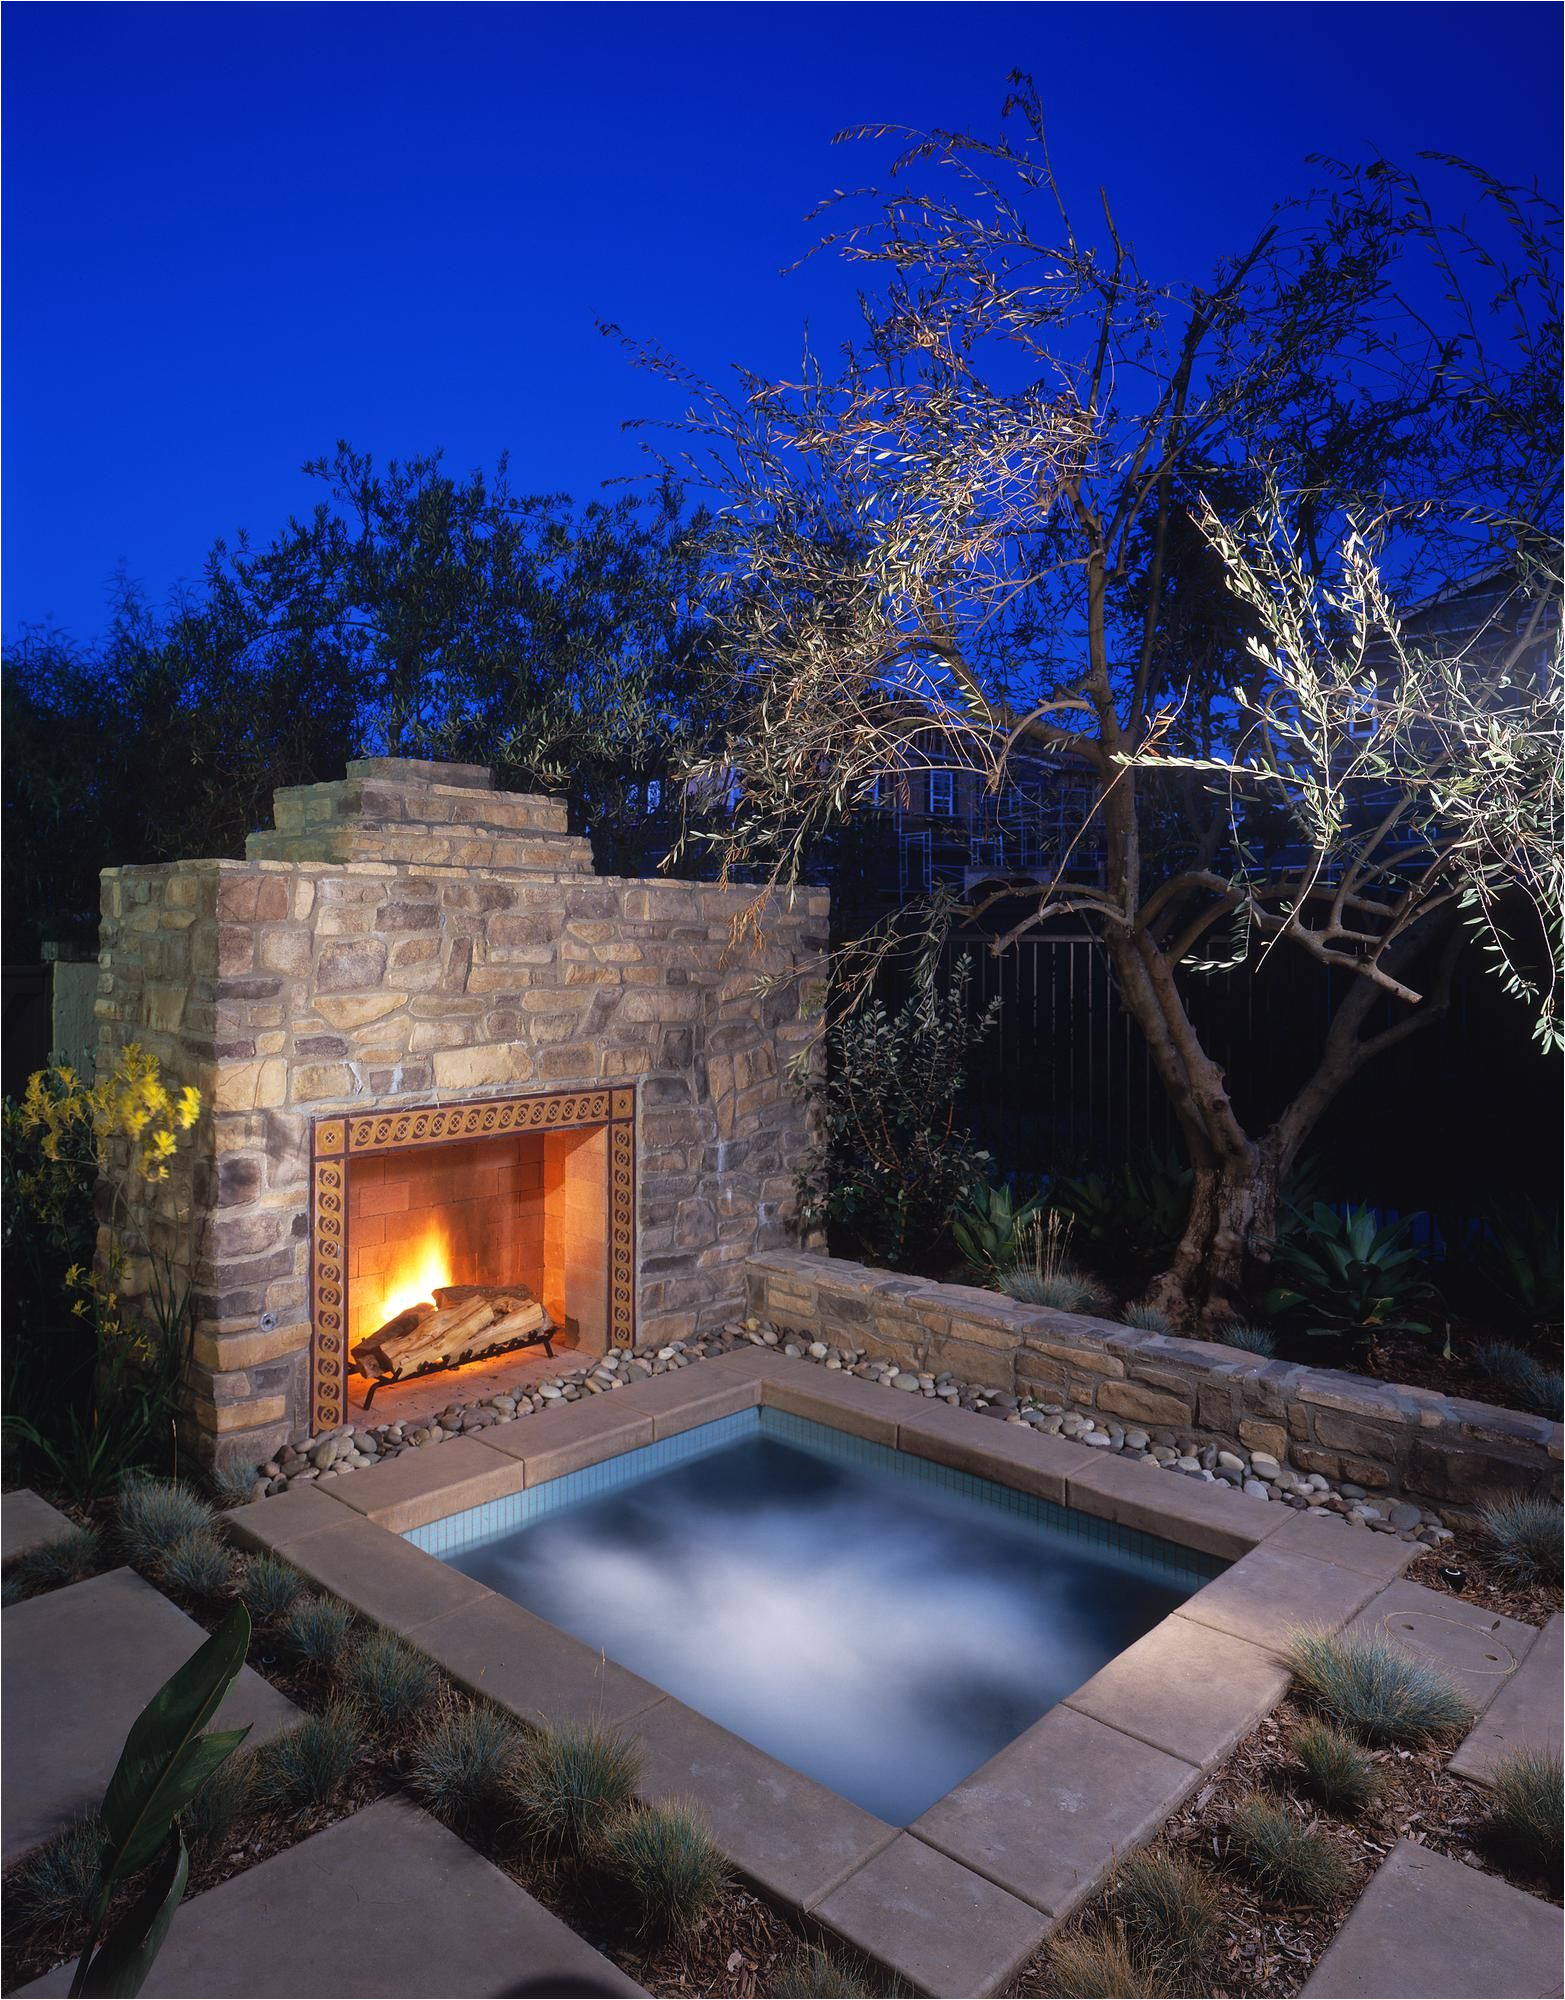 Outdoor Bathtub with Fire Hot Tub with Fireplace Great for A Small Backyard or A